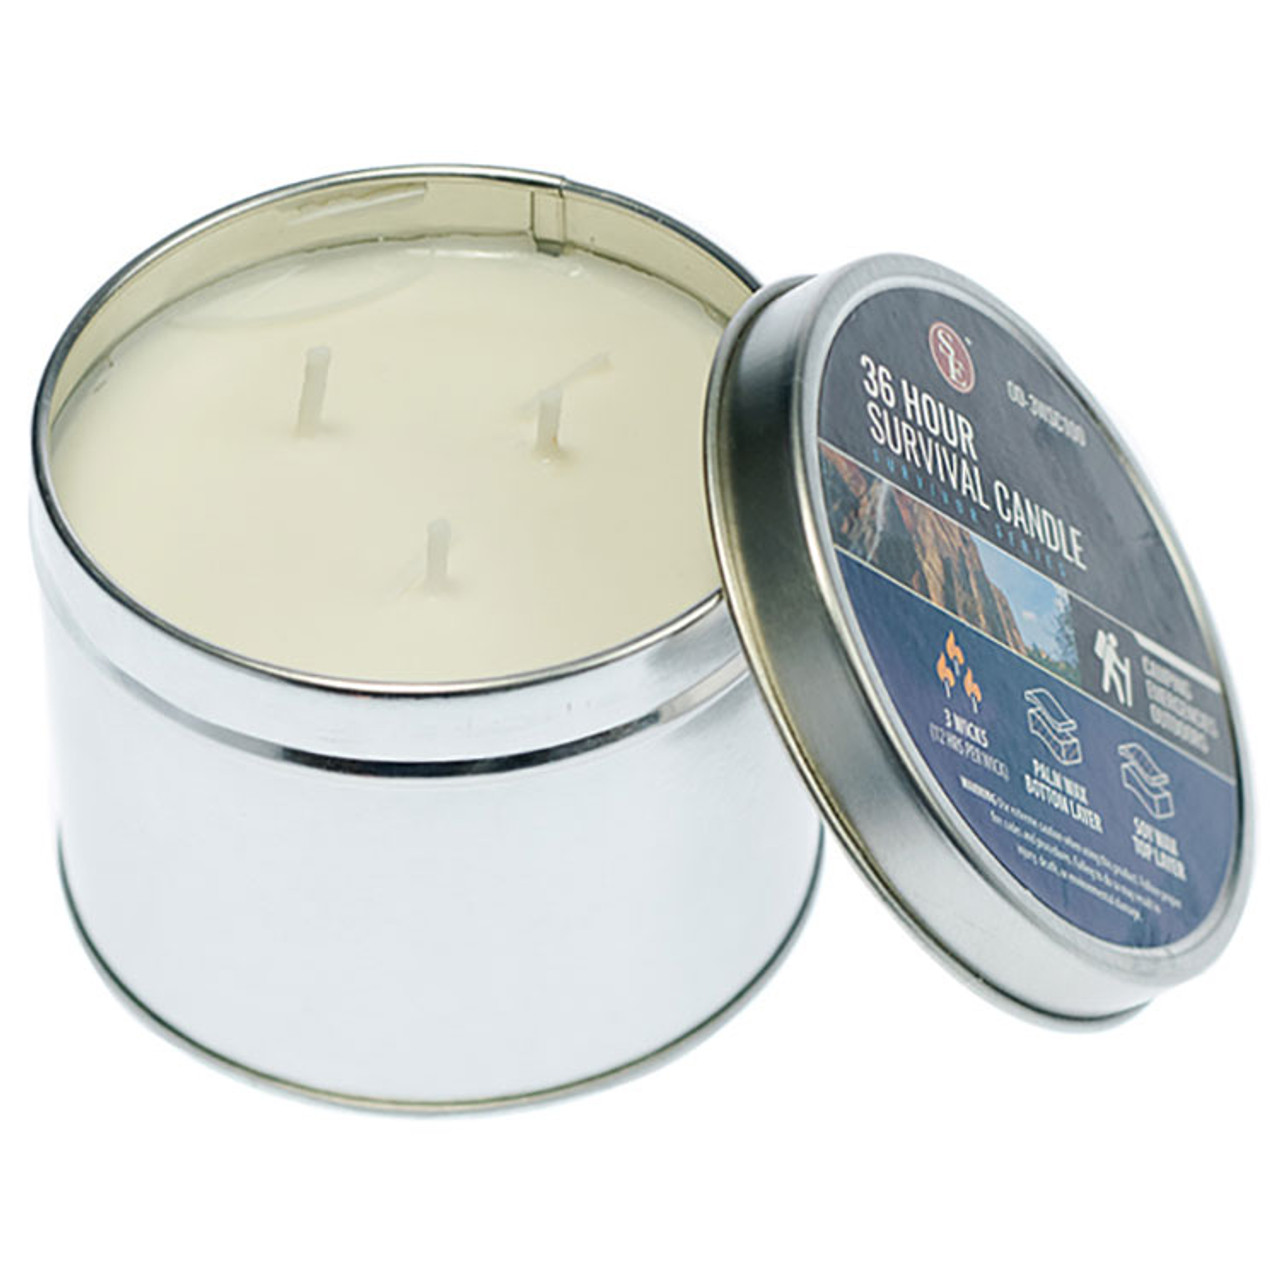 Survival Emergency Candle - Burns 36 Hours - Emergency Candles and